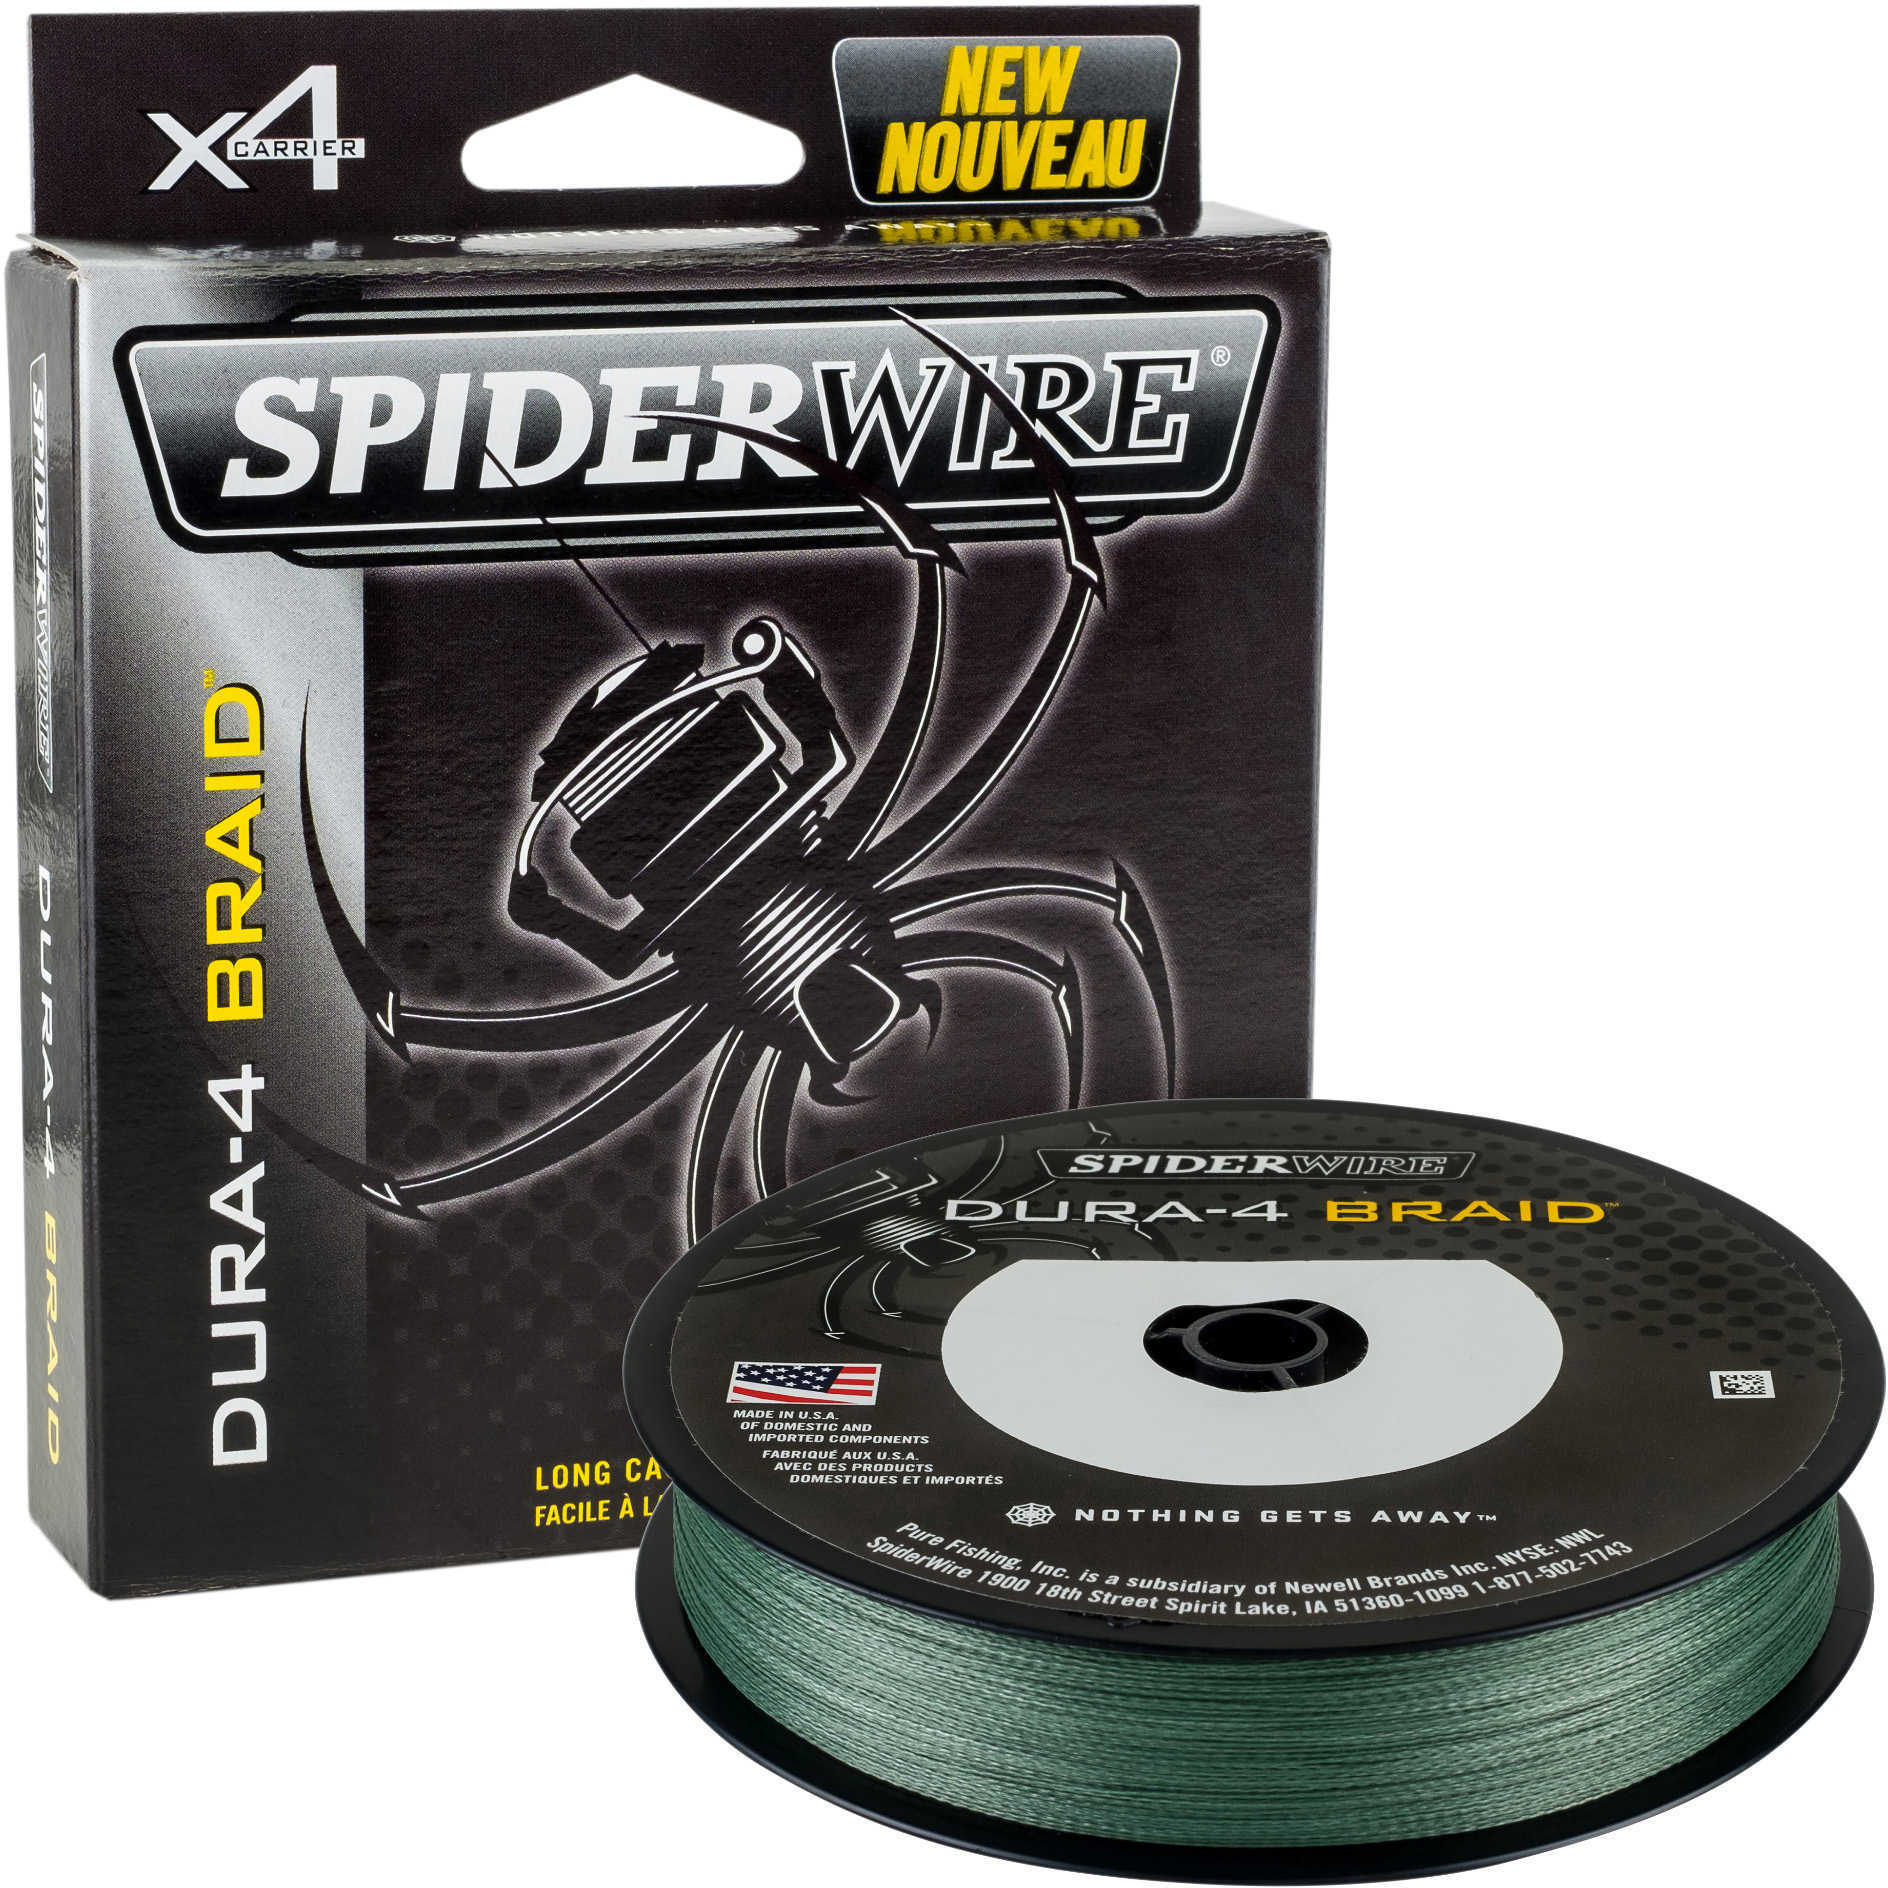 Spiderwire Dura-4 Braided Line 125 Yards , 30 lbs Tested, 0.012" Diameter, Moss Green